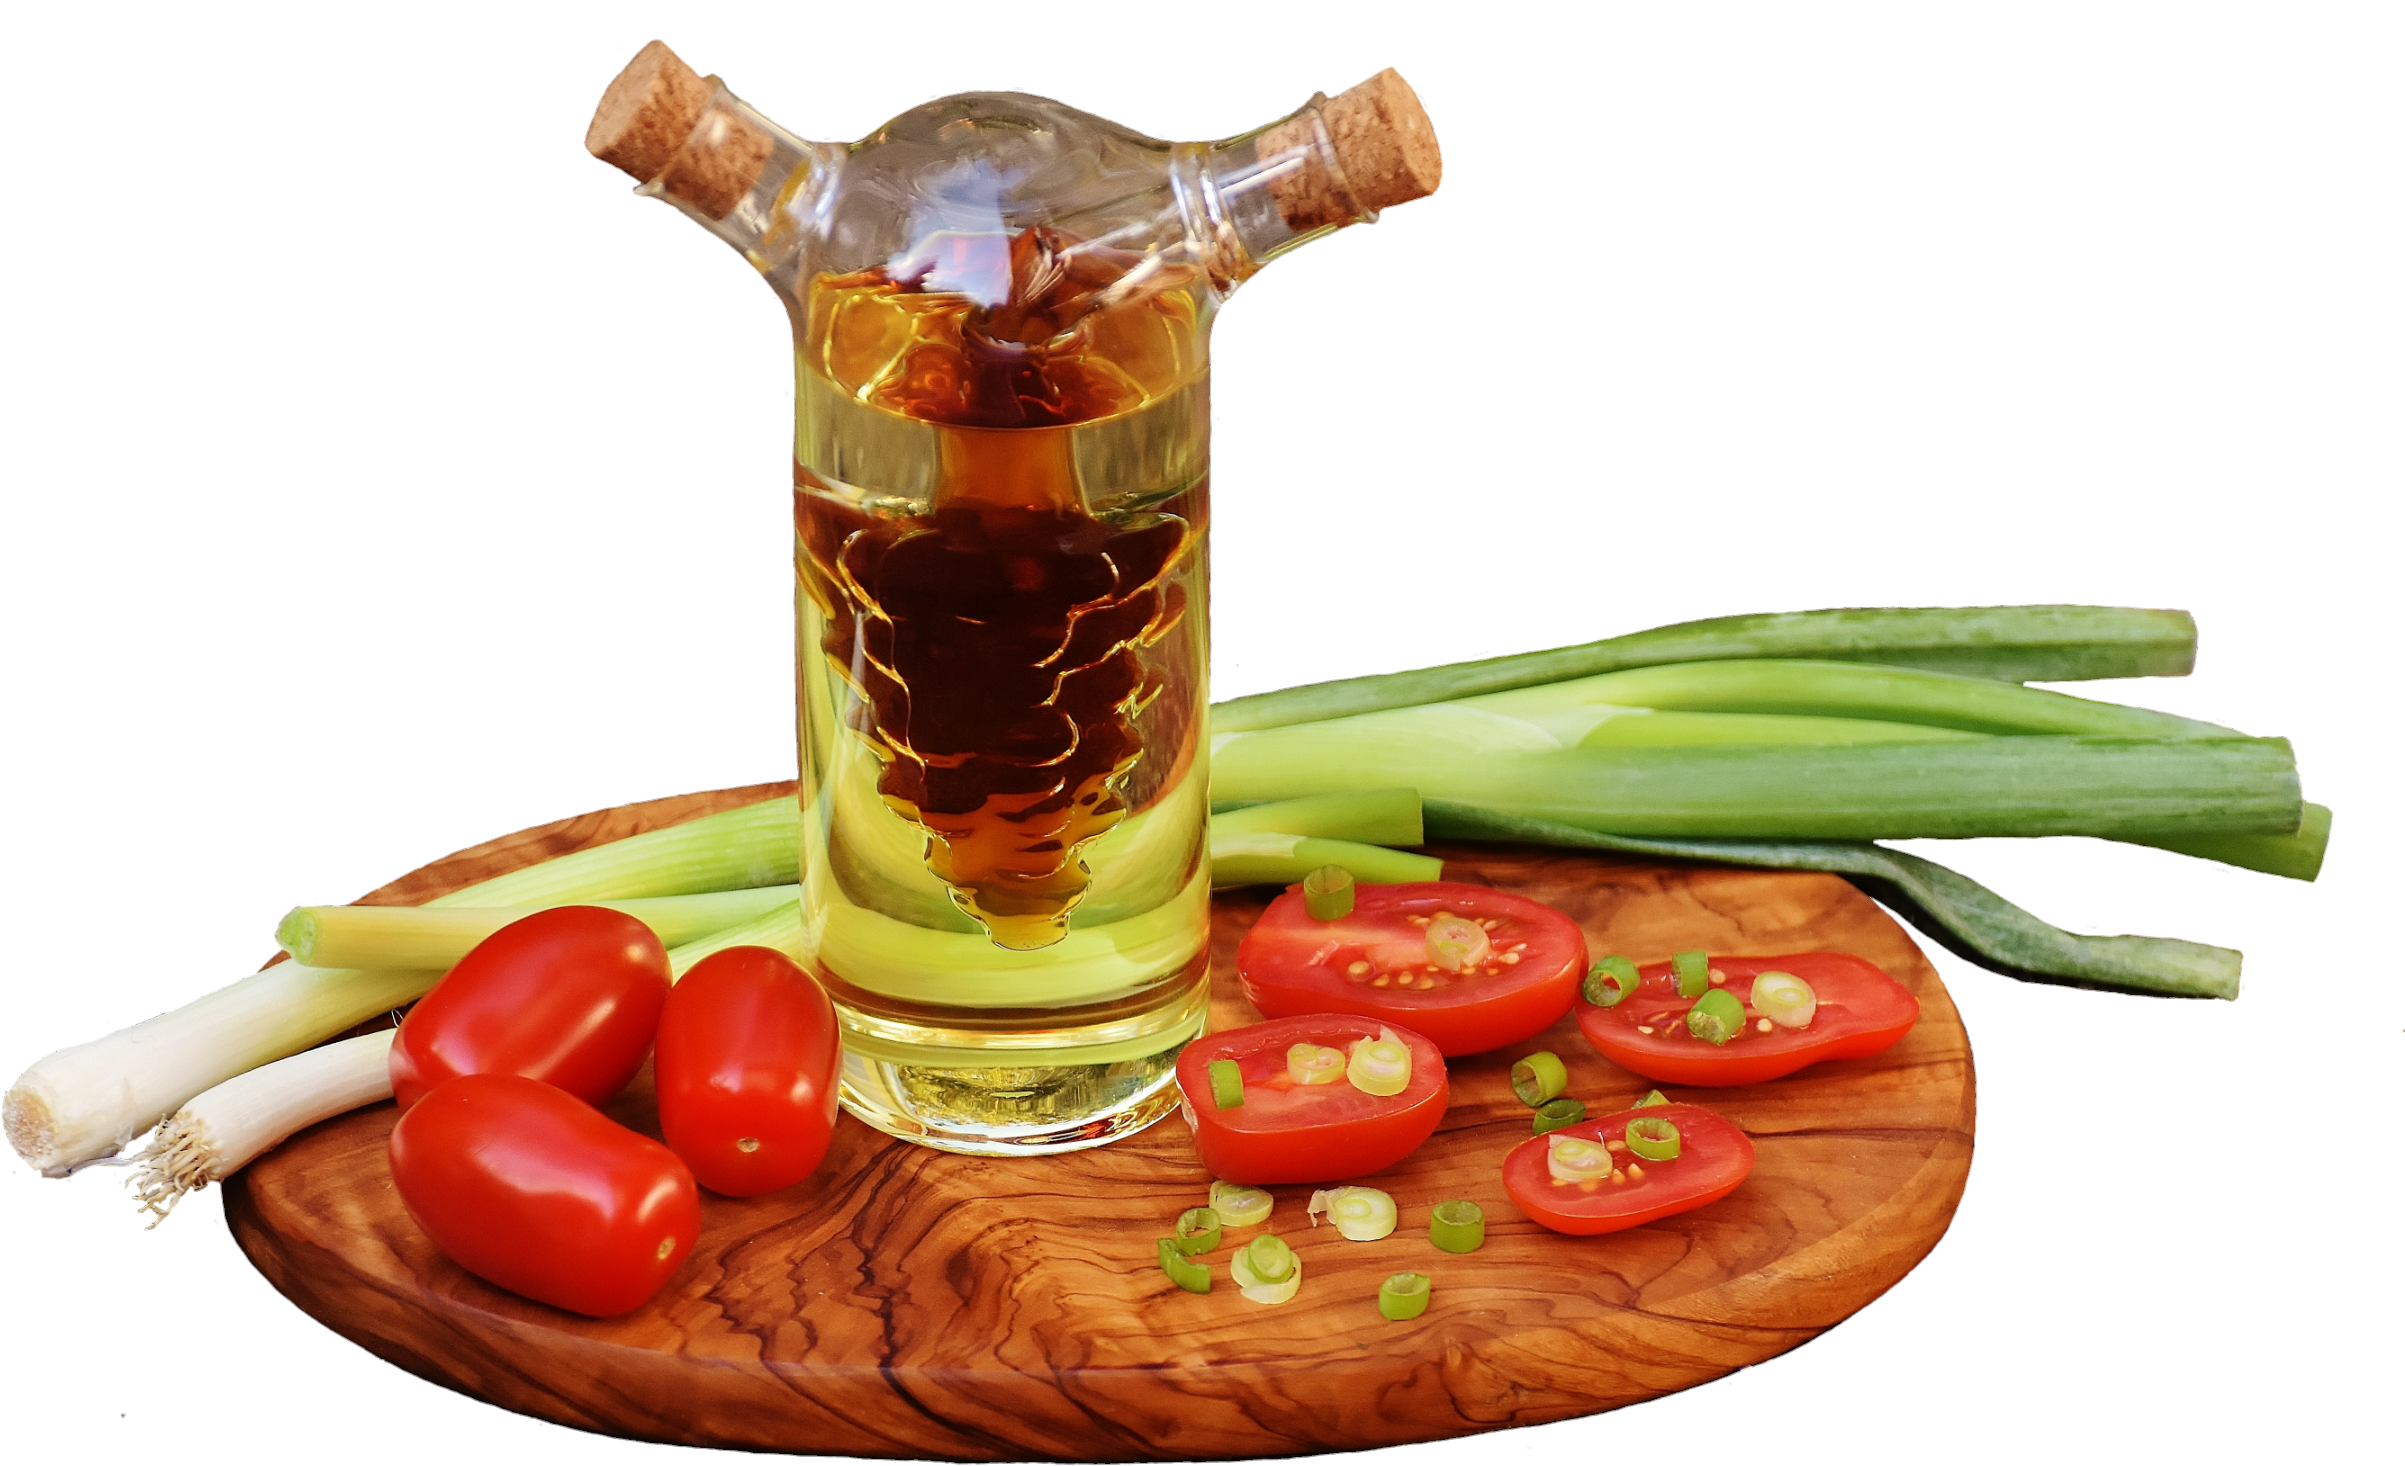 A Glass Bottle With A Cork And A Bottle Of Oil And Vegetables